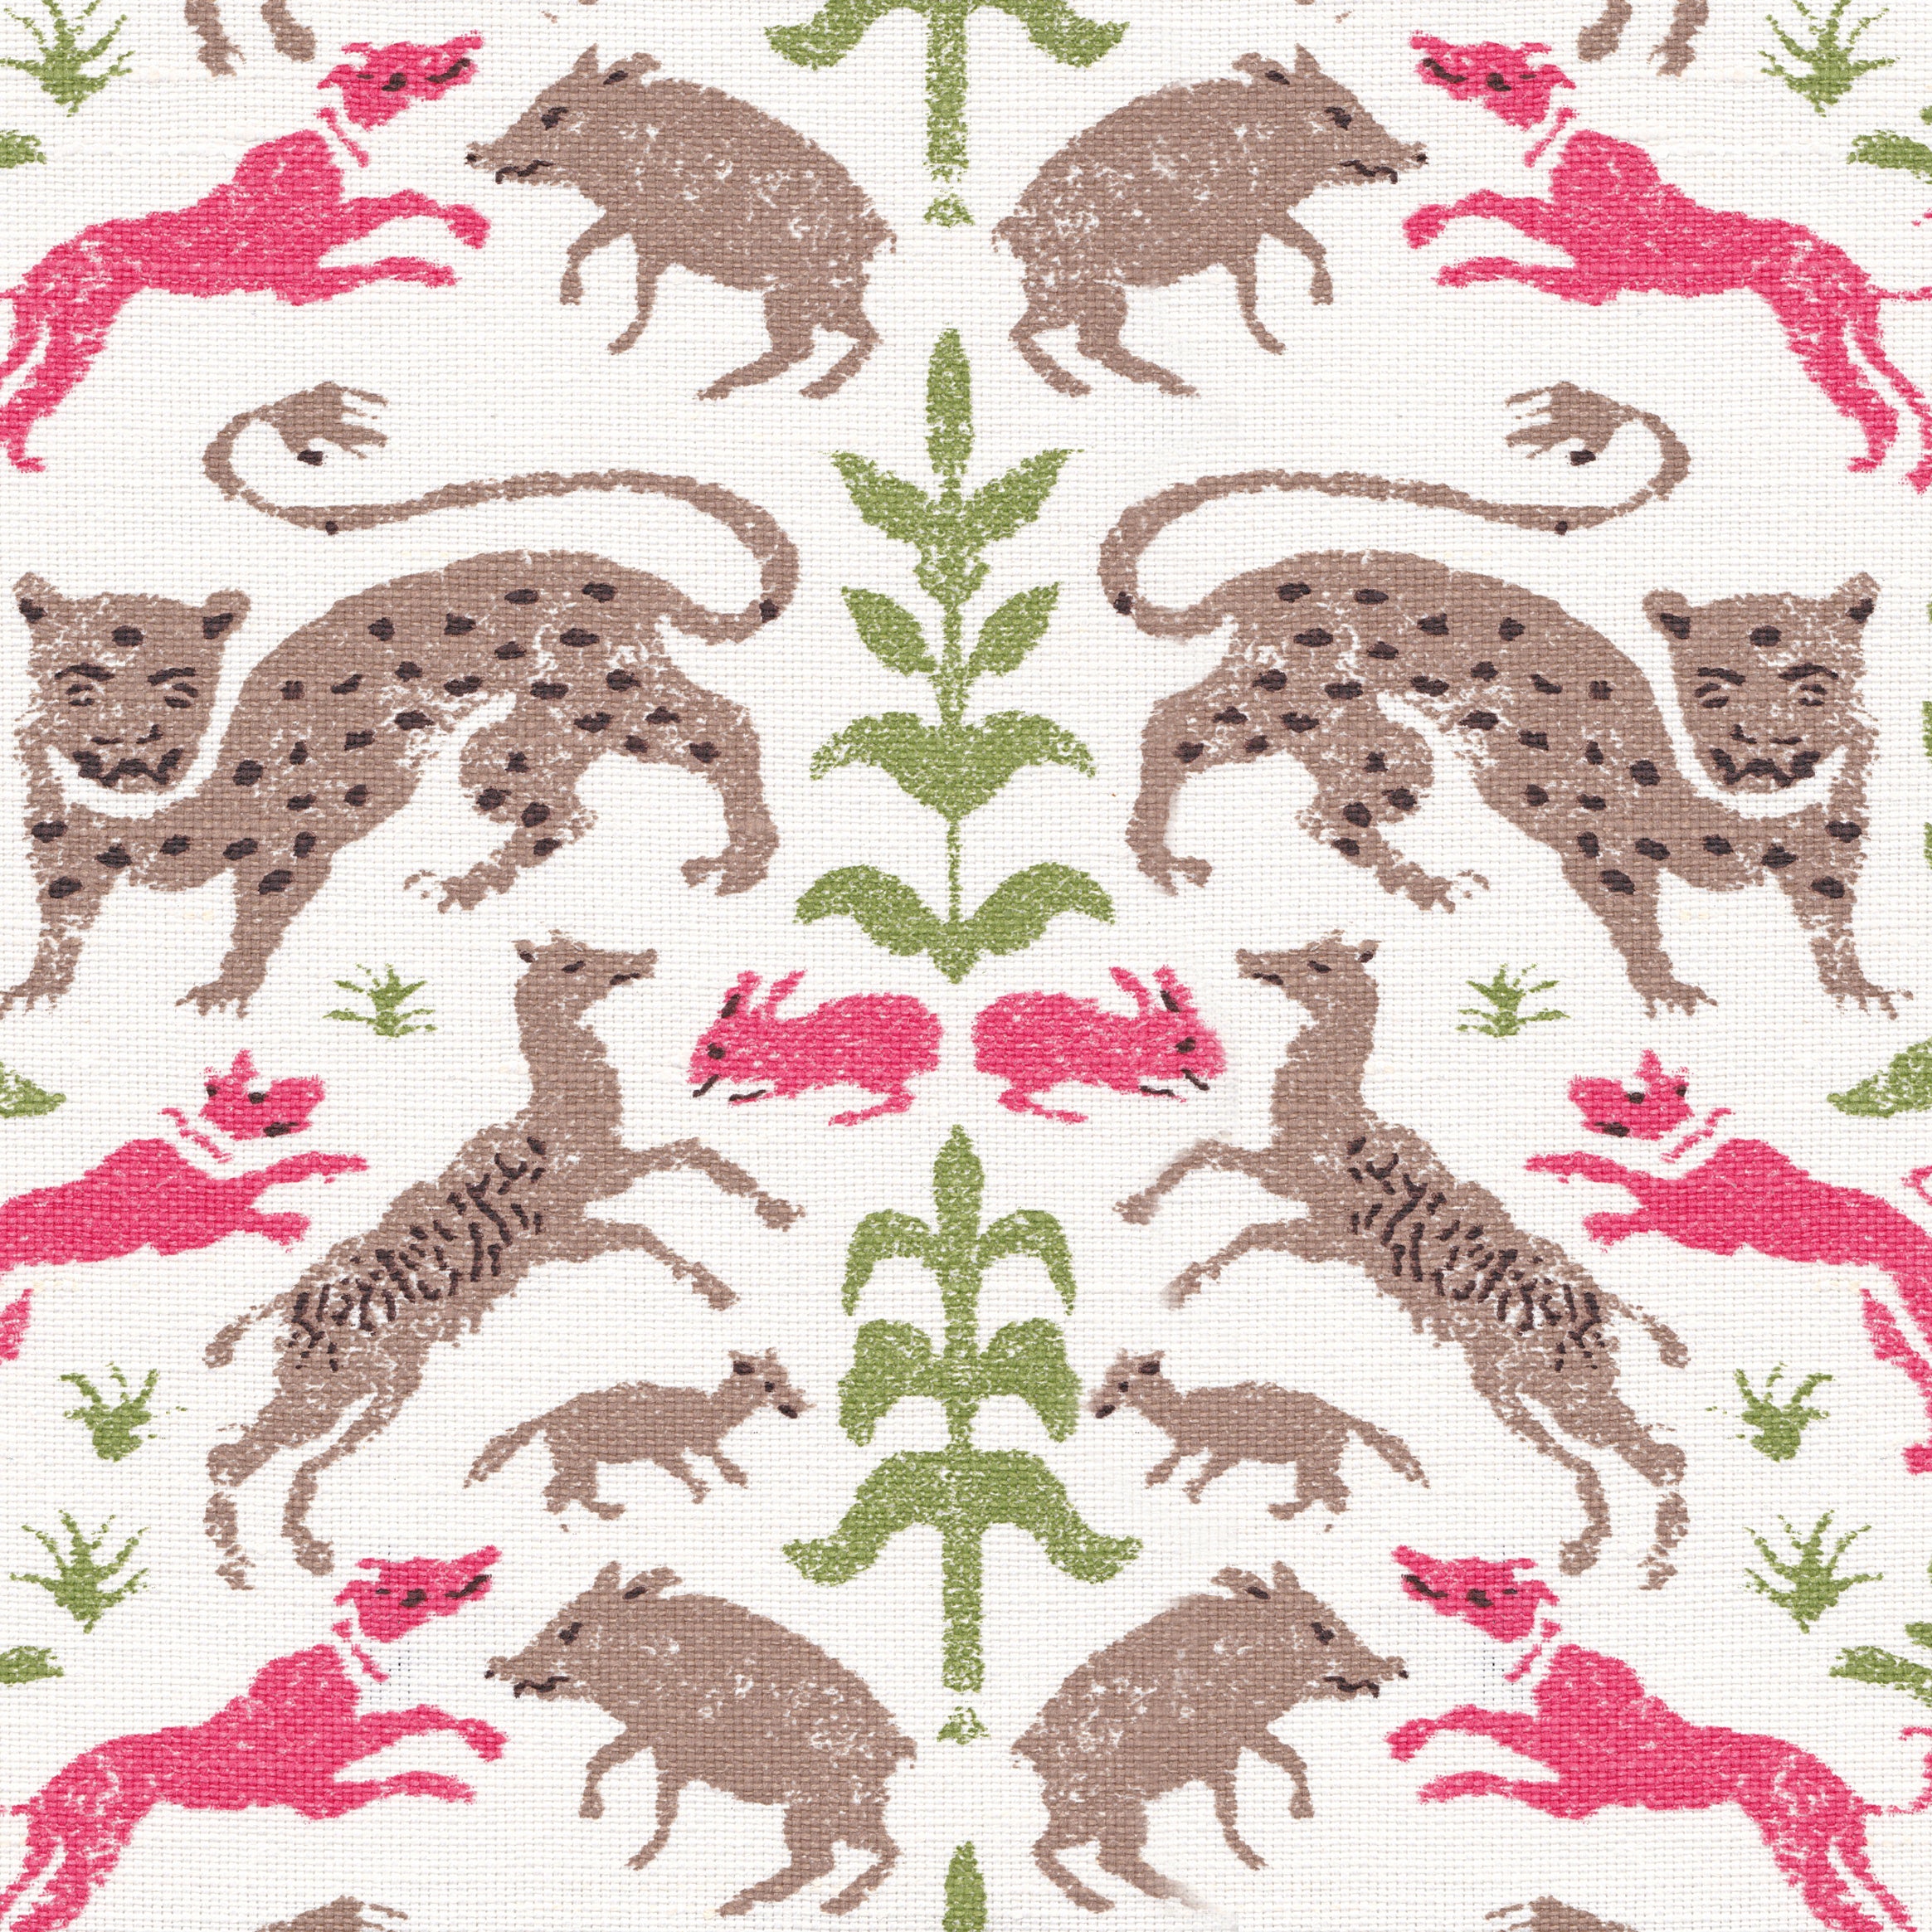 Detail of a mirrored pattern with jungle animals in brown, hot pink and green leaves on a cream field.